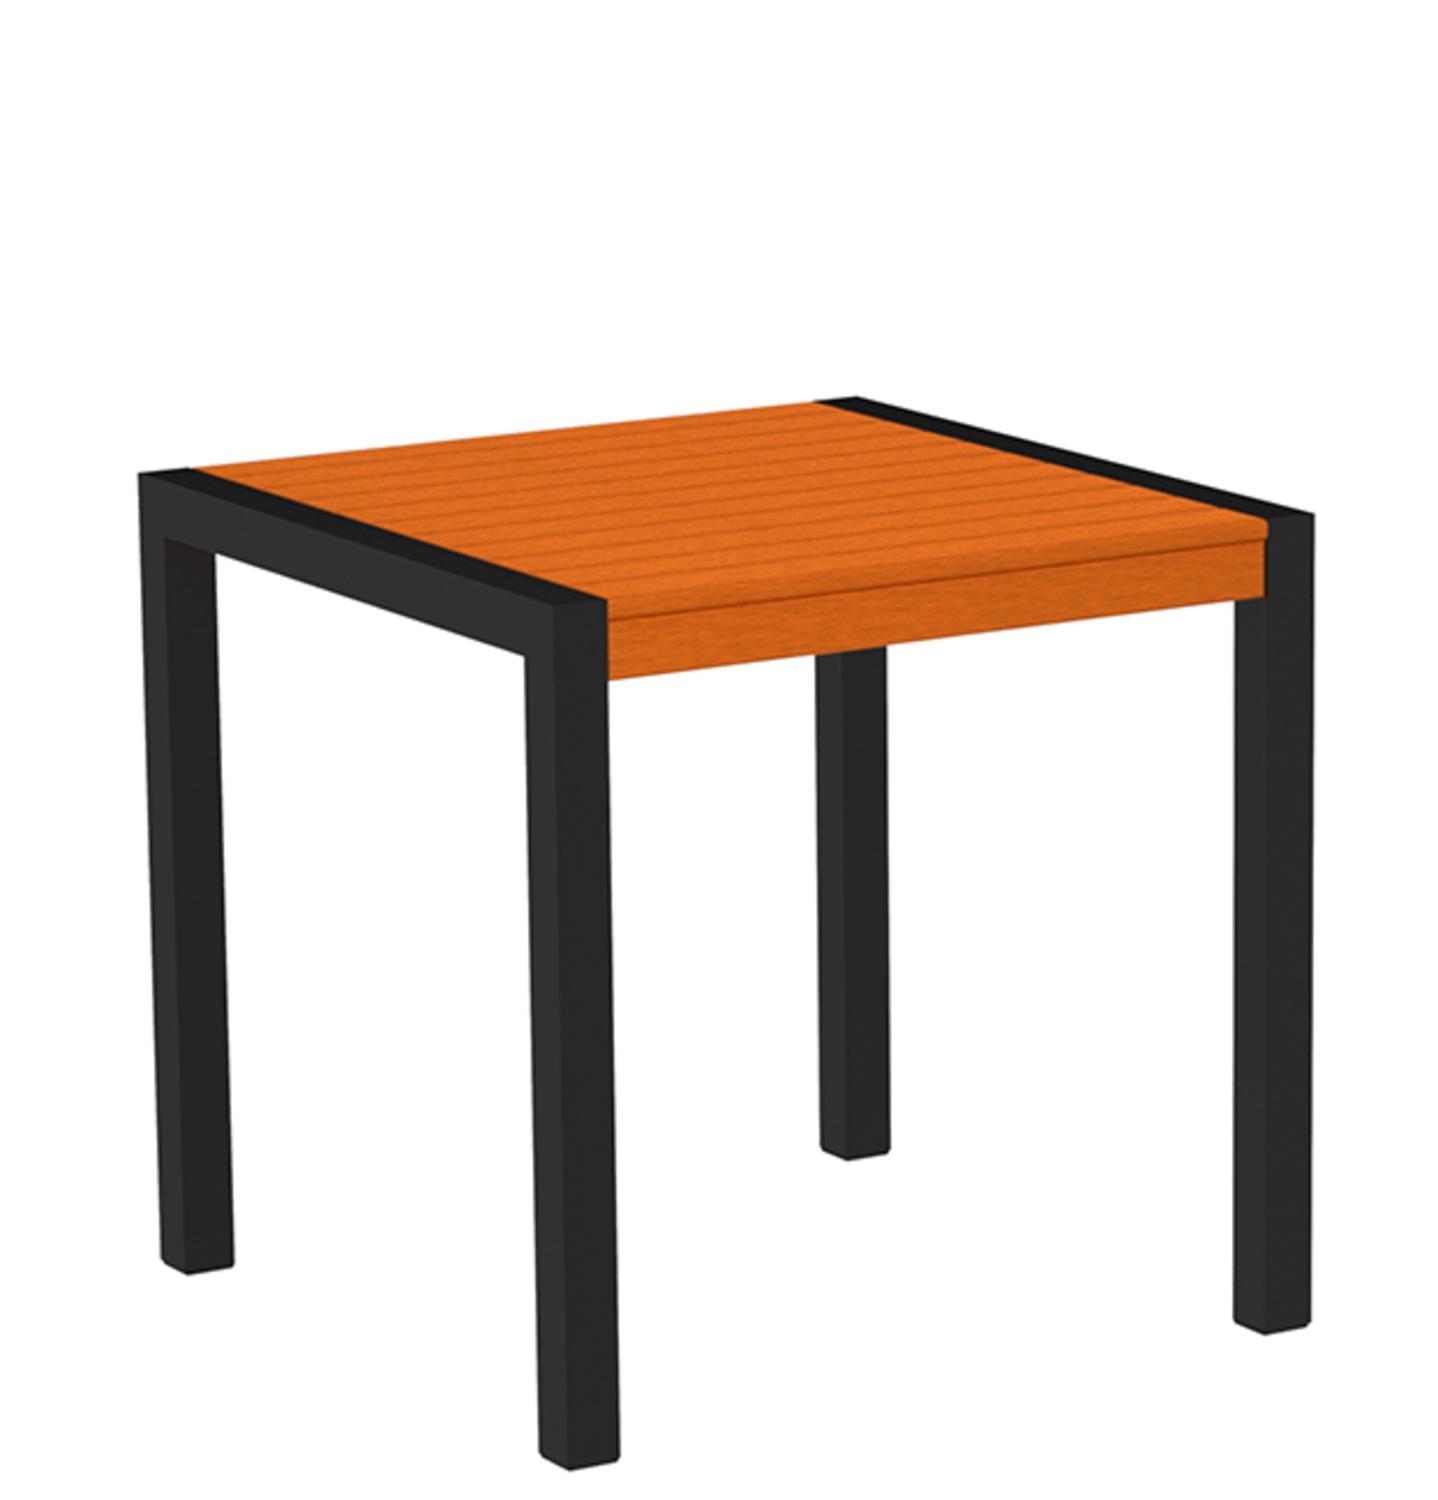 Eco-Friendly Furnishings  30" Recycled Earth-Friendly Outdoor Bistro Table - Tangerine with Black Frame